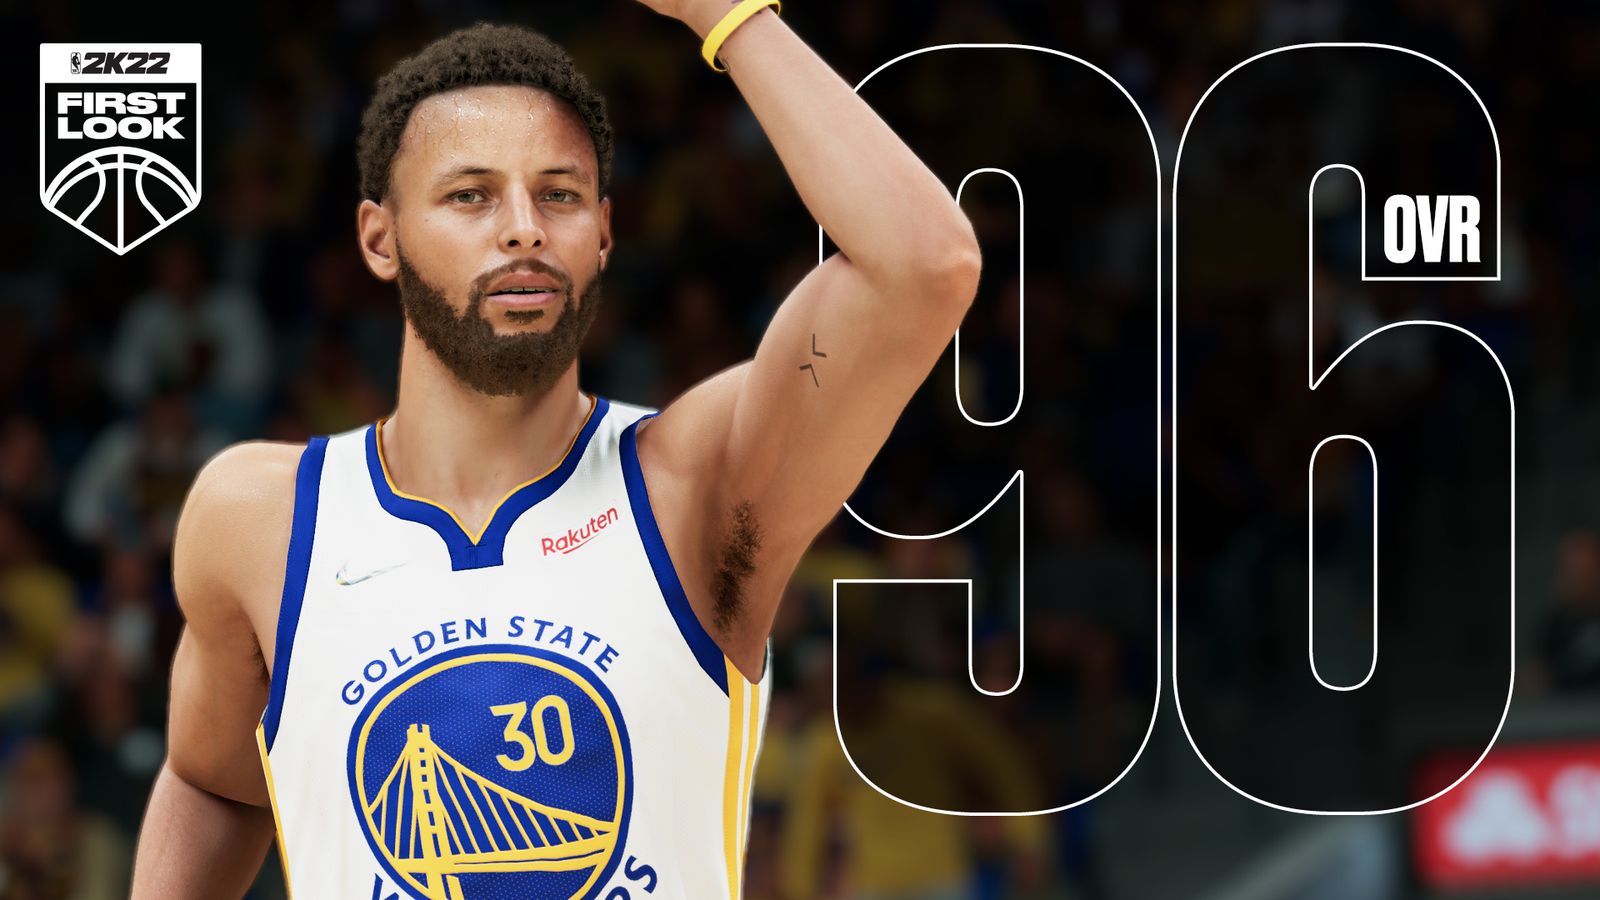 NBA 2K22 Steph Curry rating